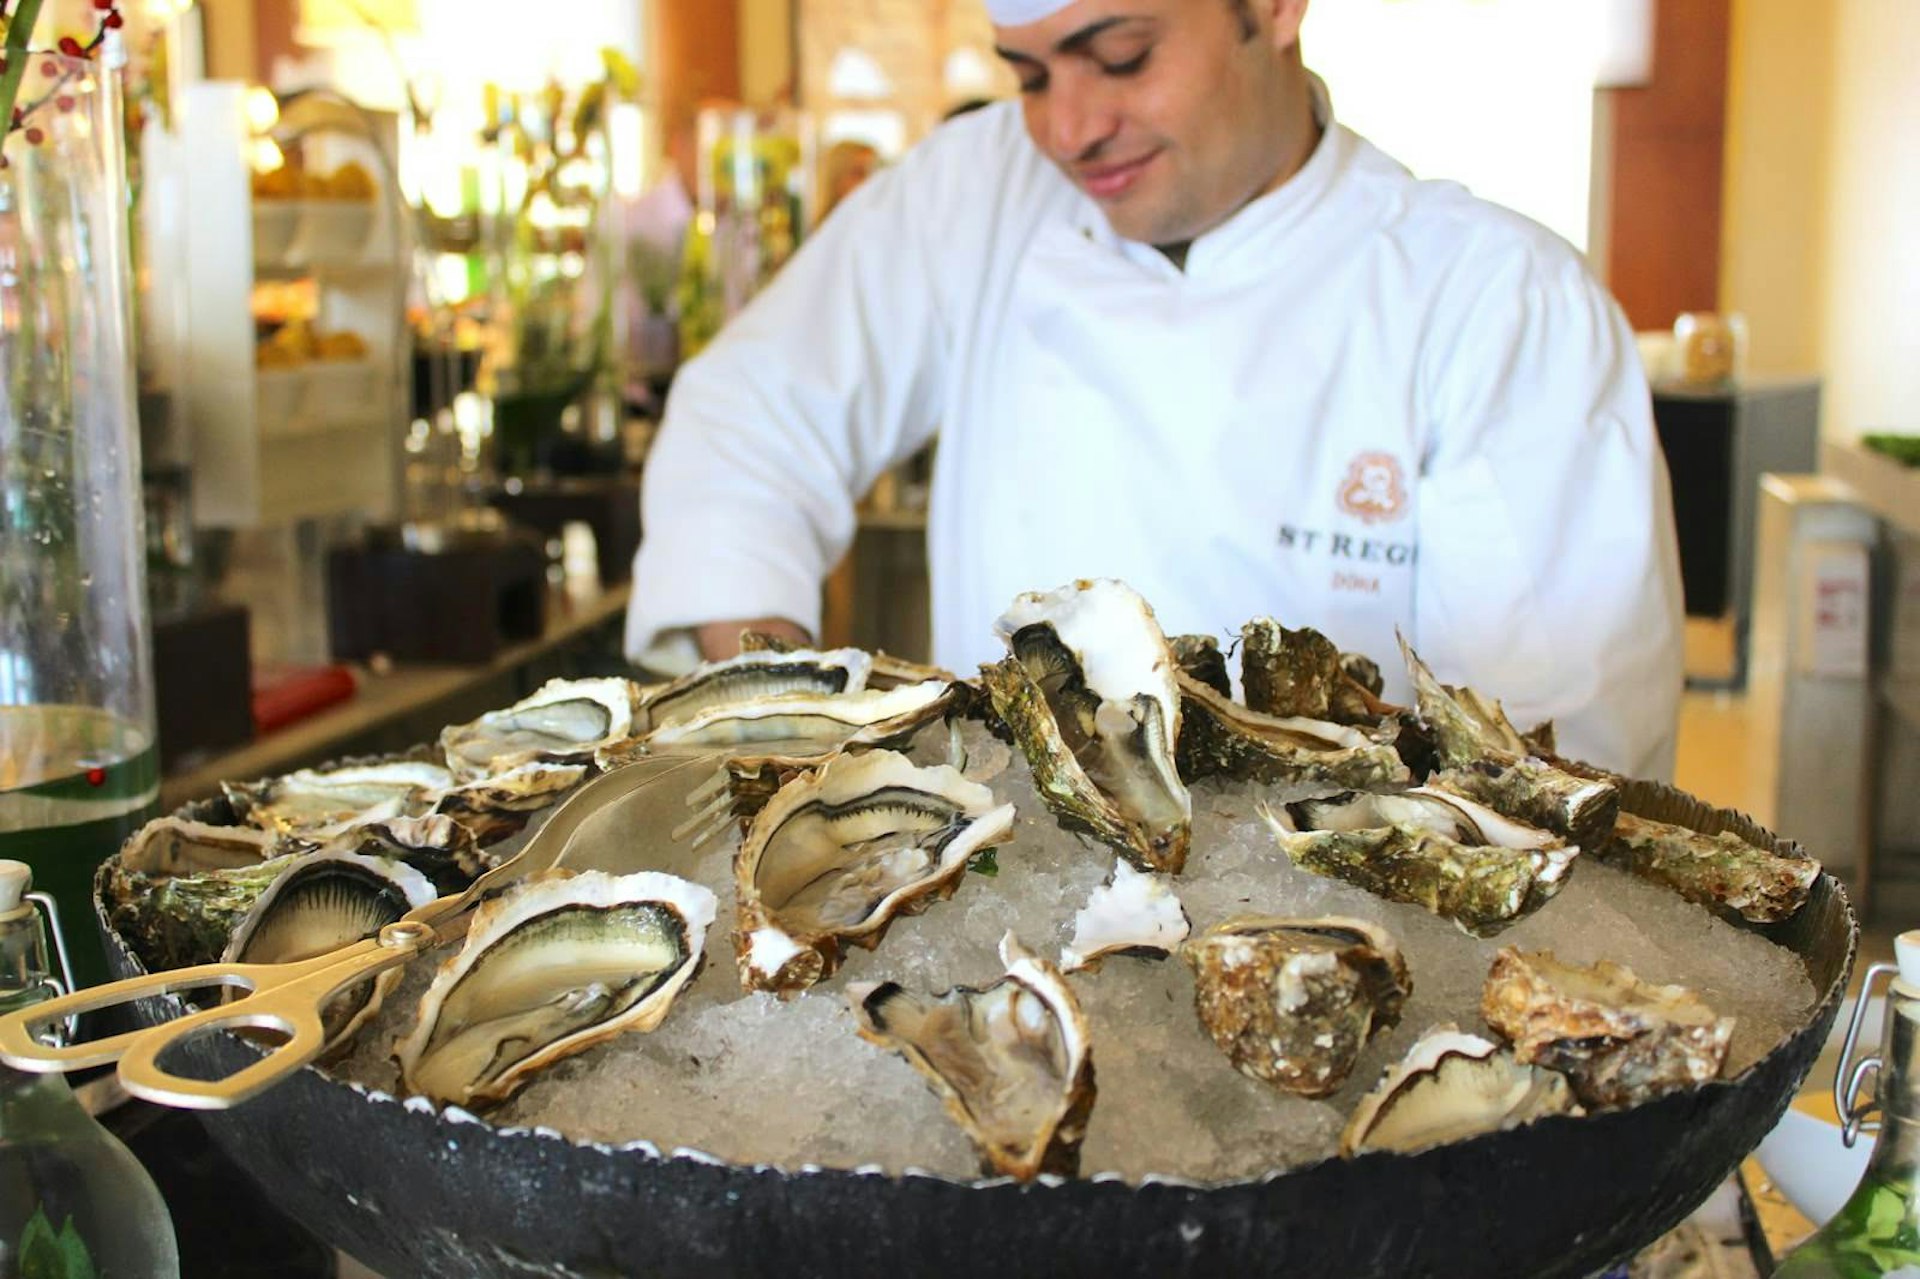 Oysters at St Regis Brunch, Doha, Qatar. Image by Polly Byles / Lonely Planet